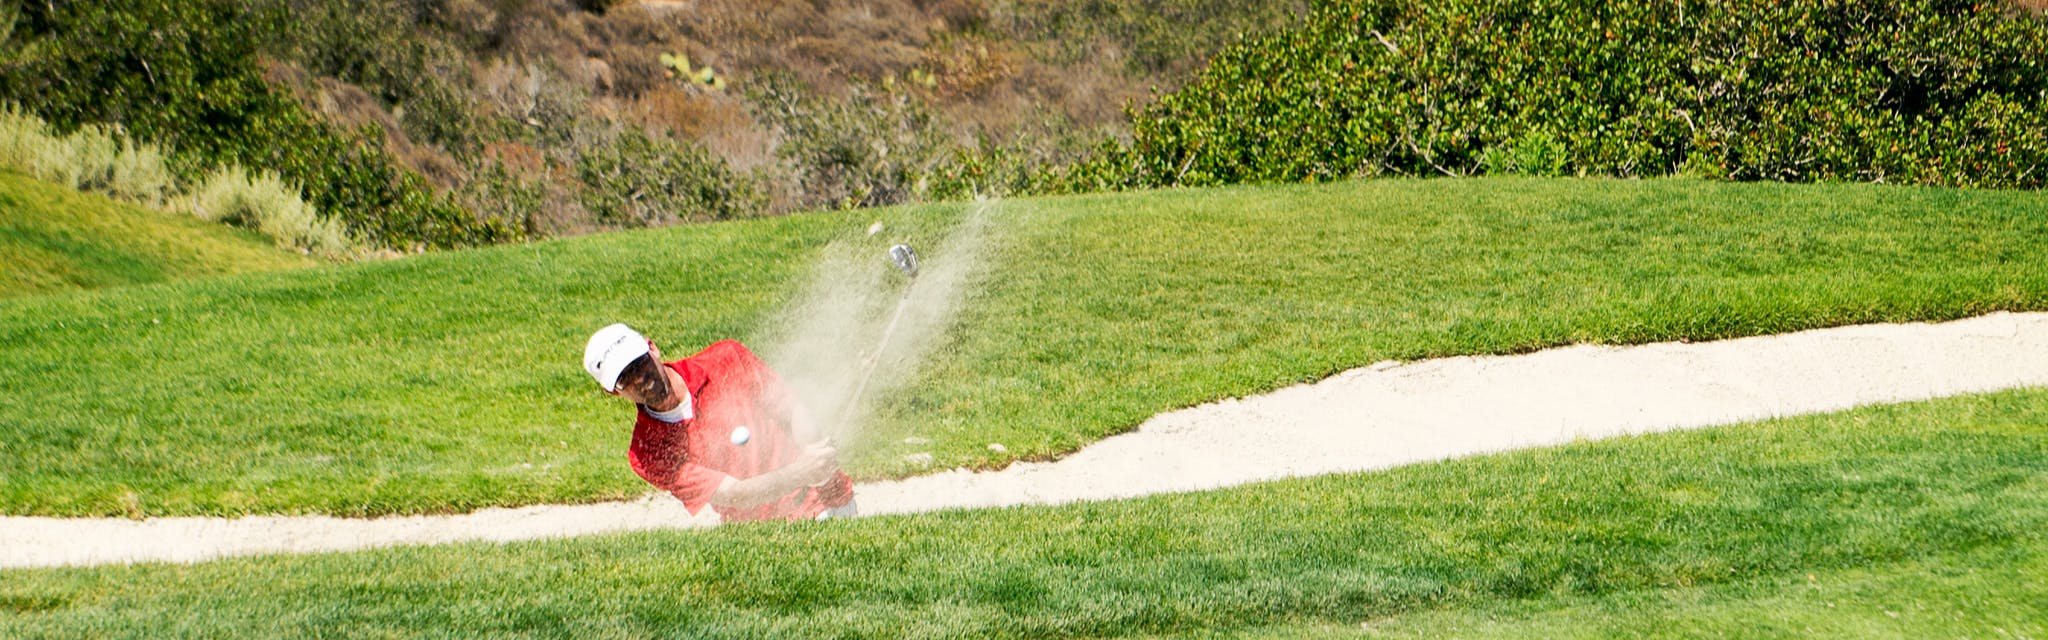 Golfer at Torrey Pines hitting a ball out of a bunker